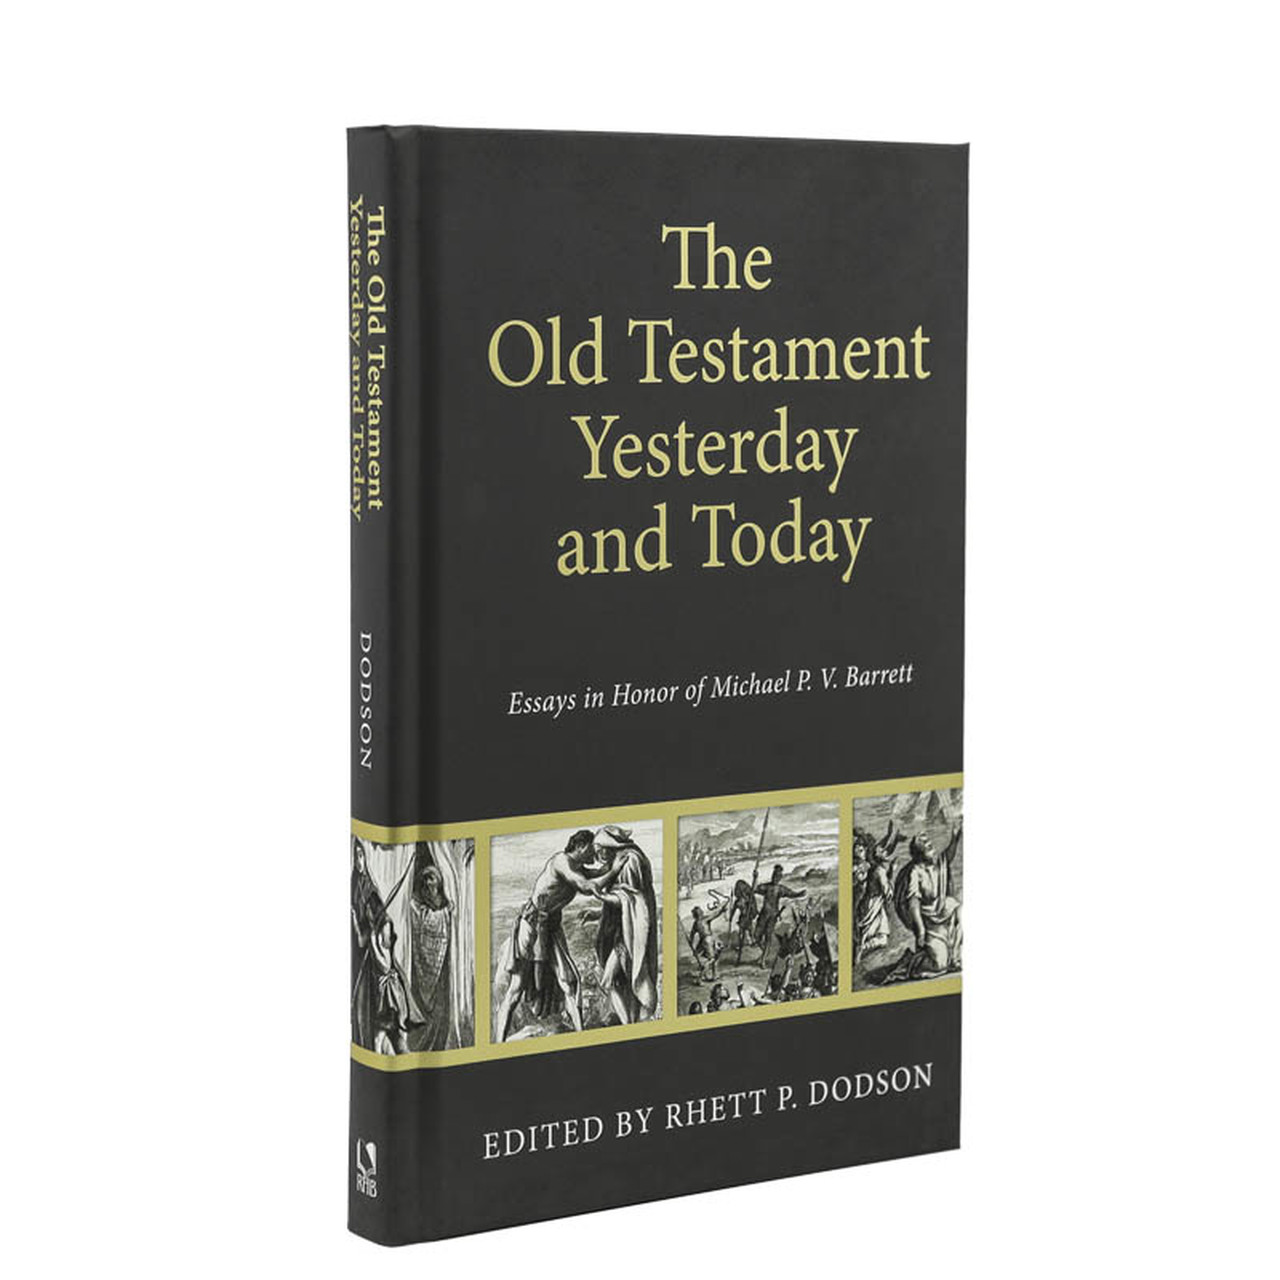 Book Notice: THE OLD TESTAMENT YESTERDAY AND TODAY: ESSAYS IN HONOR OF MICHAEL P. V. BARRETT, by Rhett P. Dodson, ed.